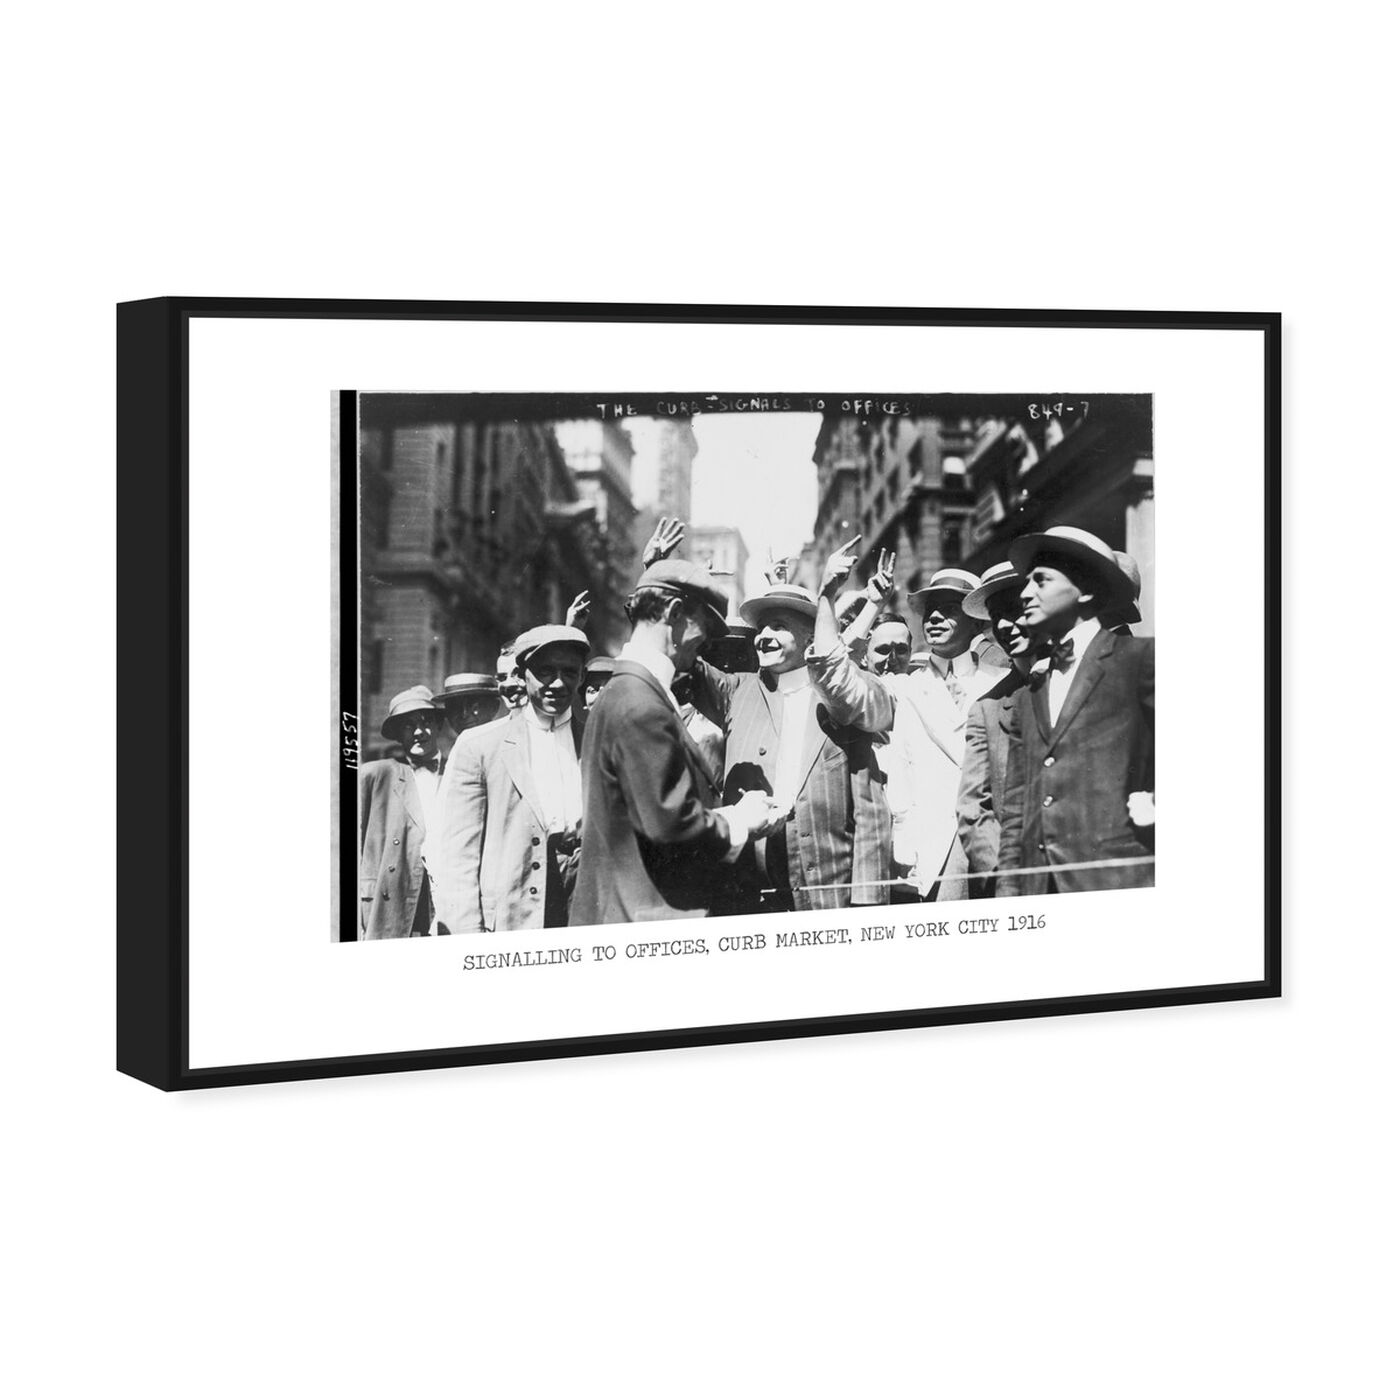 Angled view of Curb Market 1916 featuring people and portraits and silhouettes art.